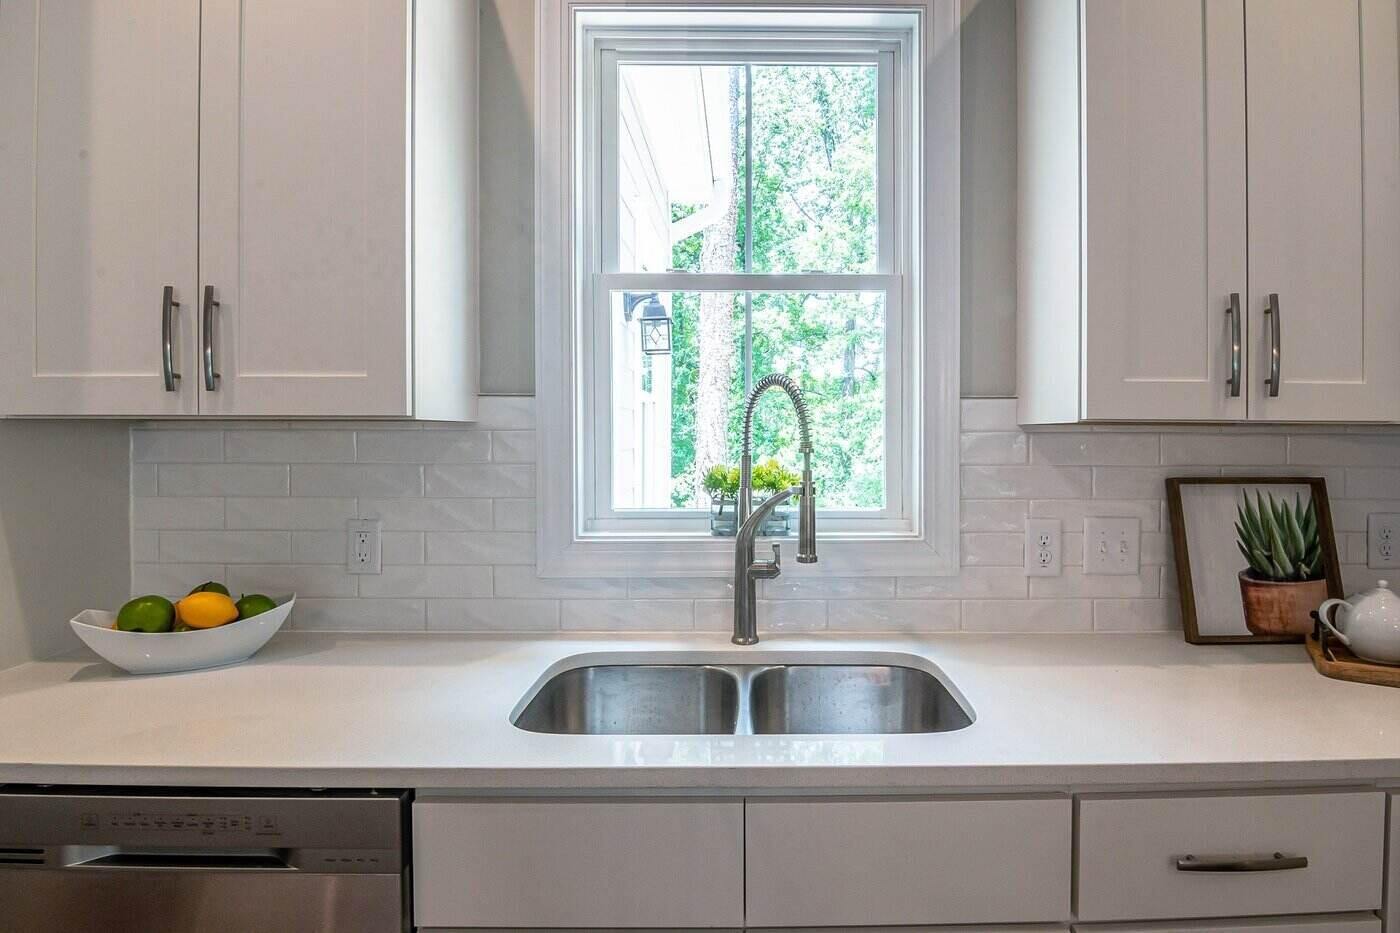 11 Eco Friendly Ways To Refresh Your Kitchen Cabinets